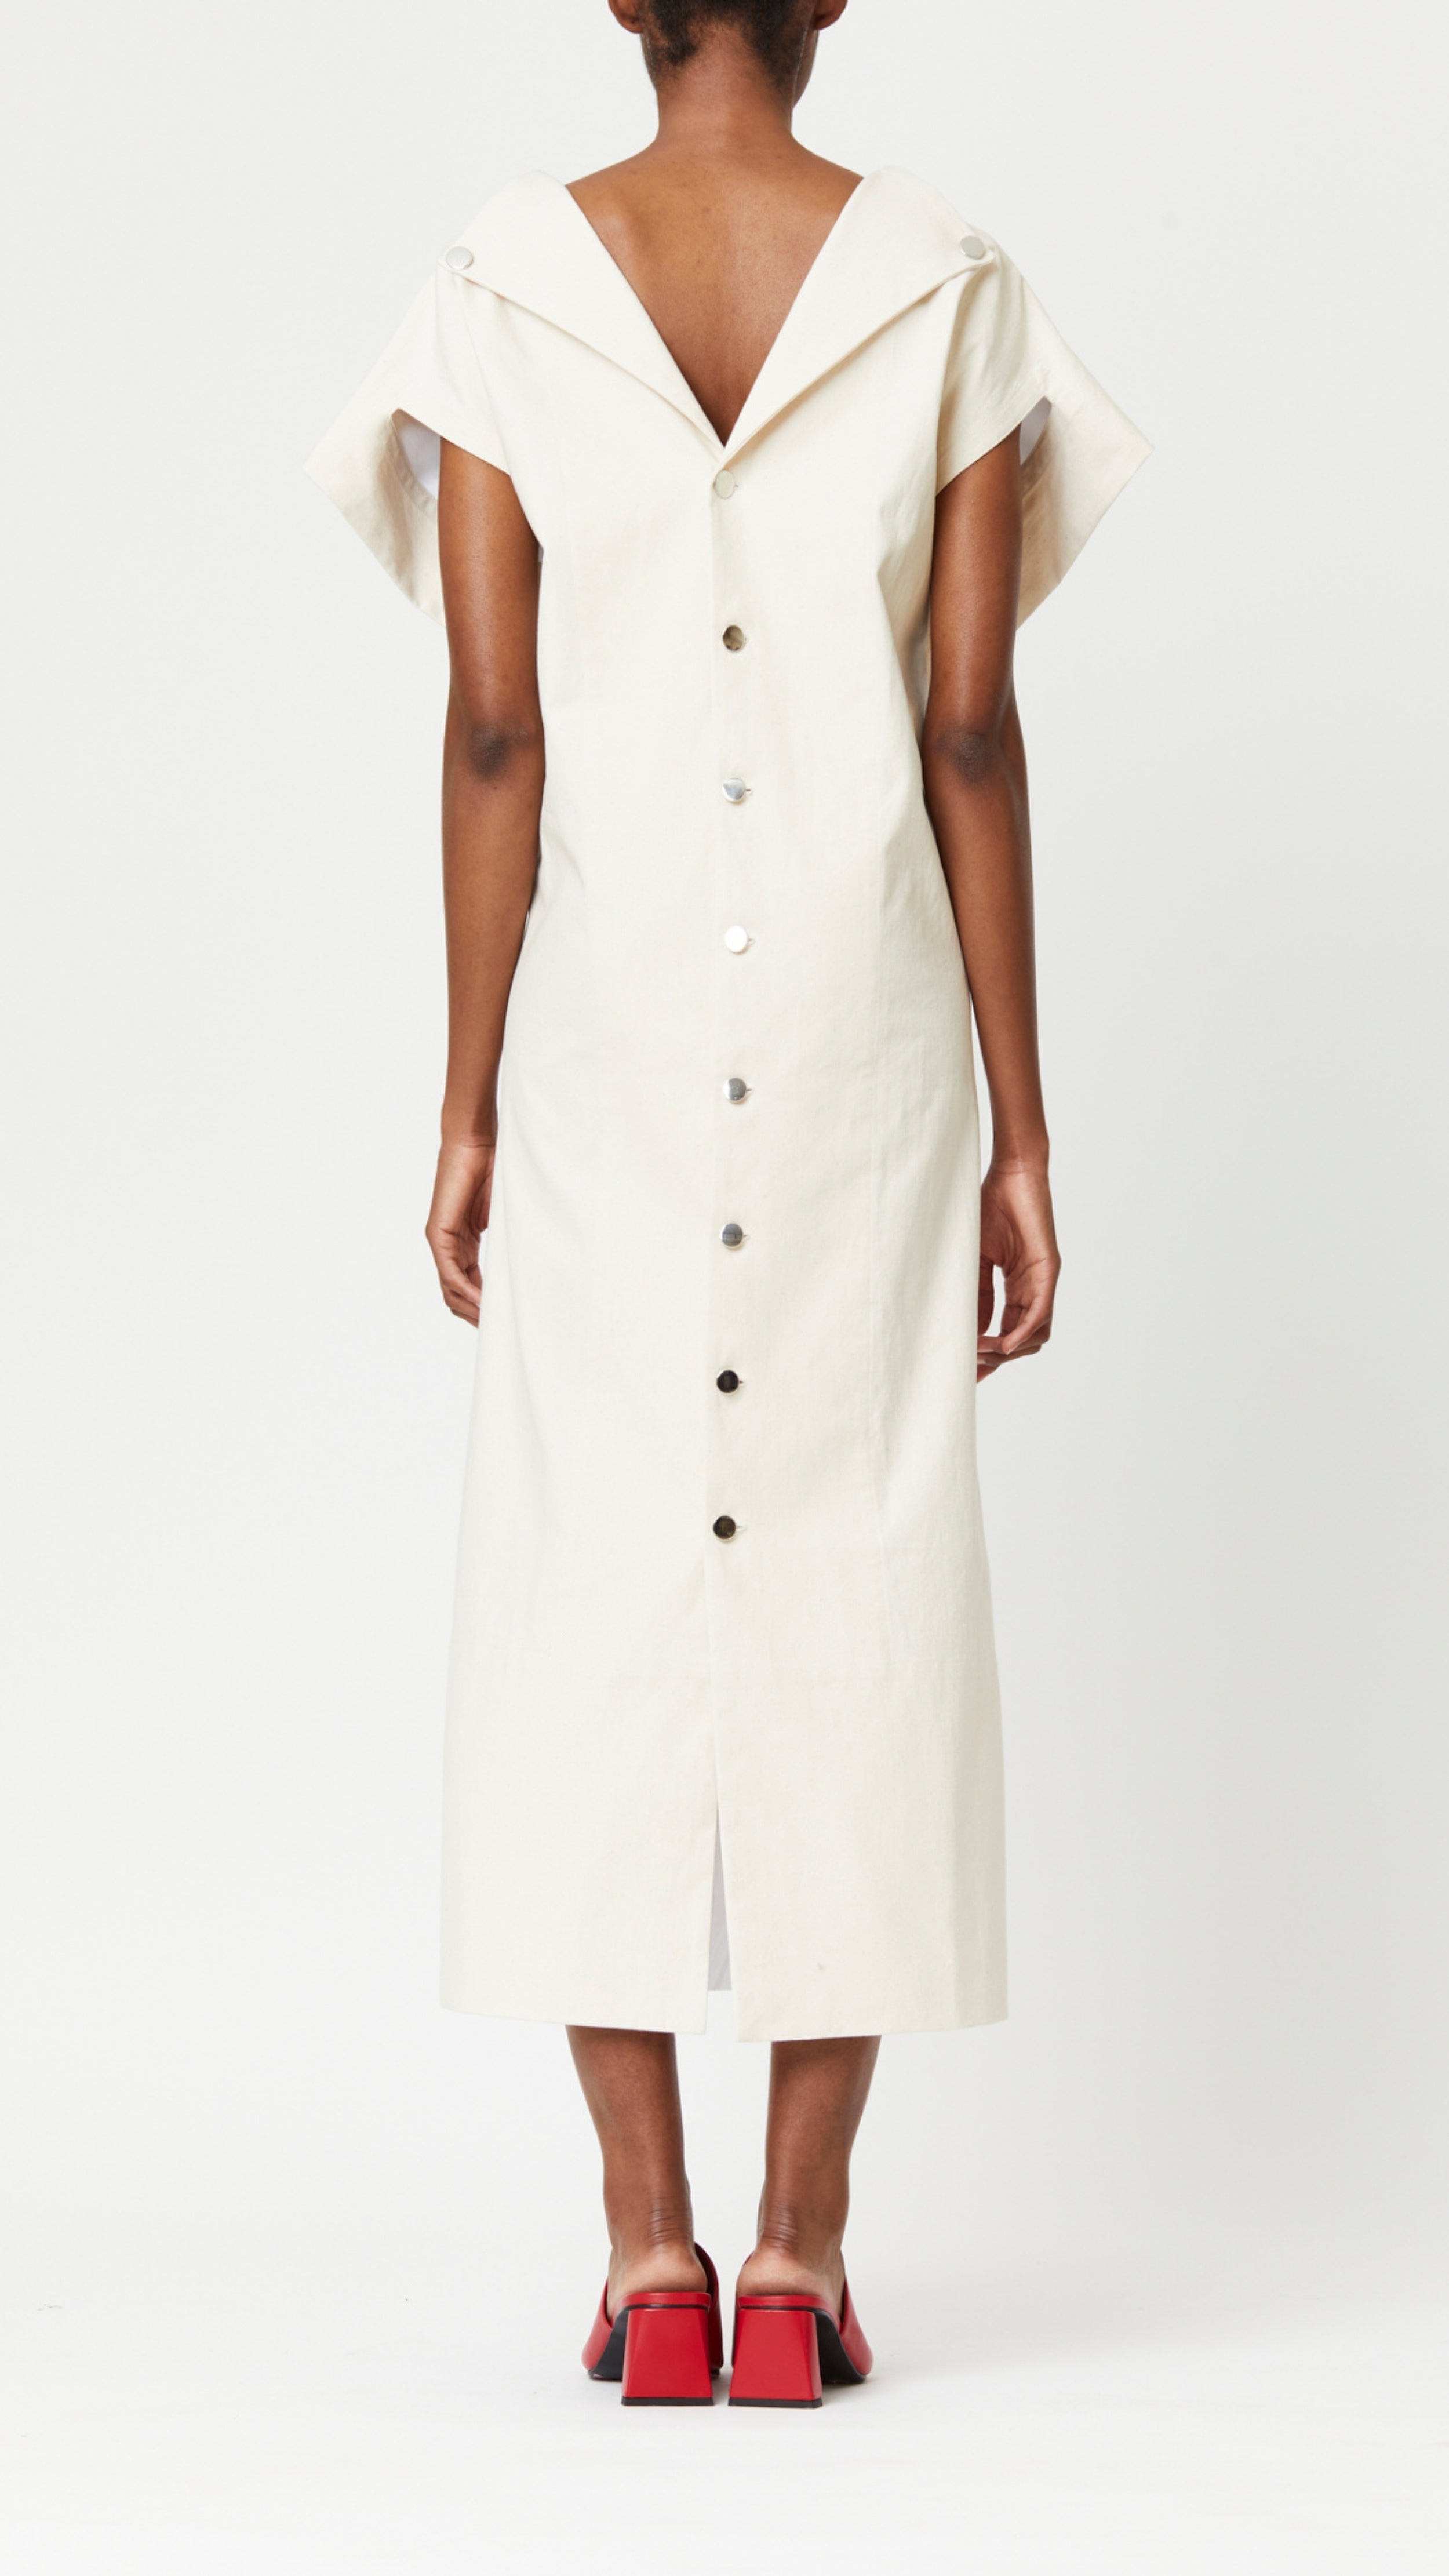 Plan C Smock Dress with Buttons in White &amp; Calico. Summer dress. Smock dress with a front white panel over a soft calico interior. The front shoulder buttons create a dramatic sleeve and the dress has a v-neck in the back. A midi length dress and back button detailing. Shown on model facing back with button details.